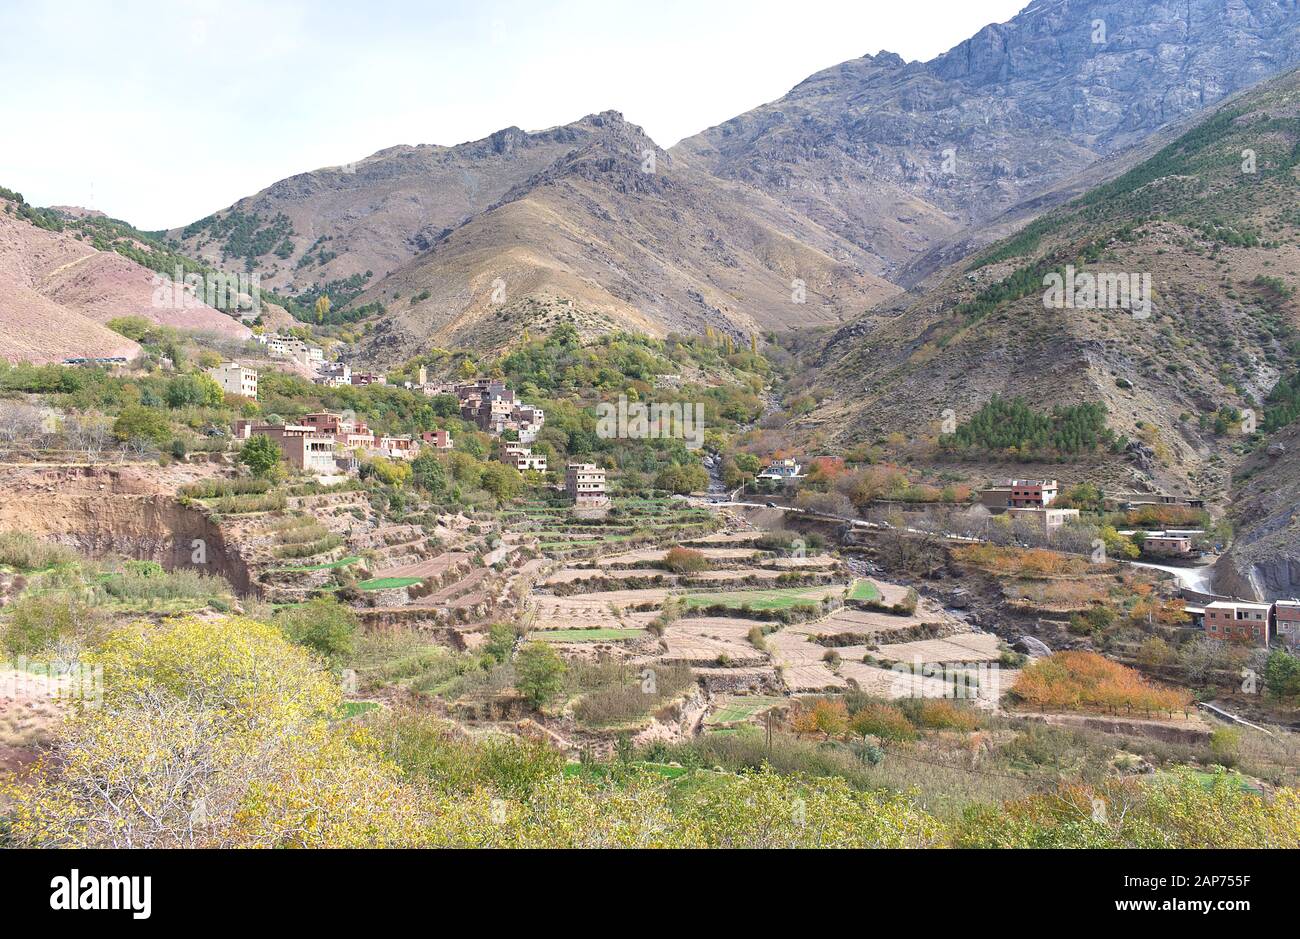 View of the village of Tamatert in the Moroccan Atlas Mountains which lies in the valley close to the mountain of Toubkal, with tiered field terraces Stock Photo